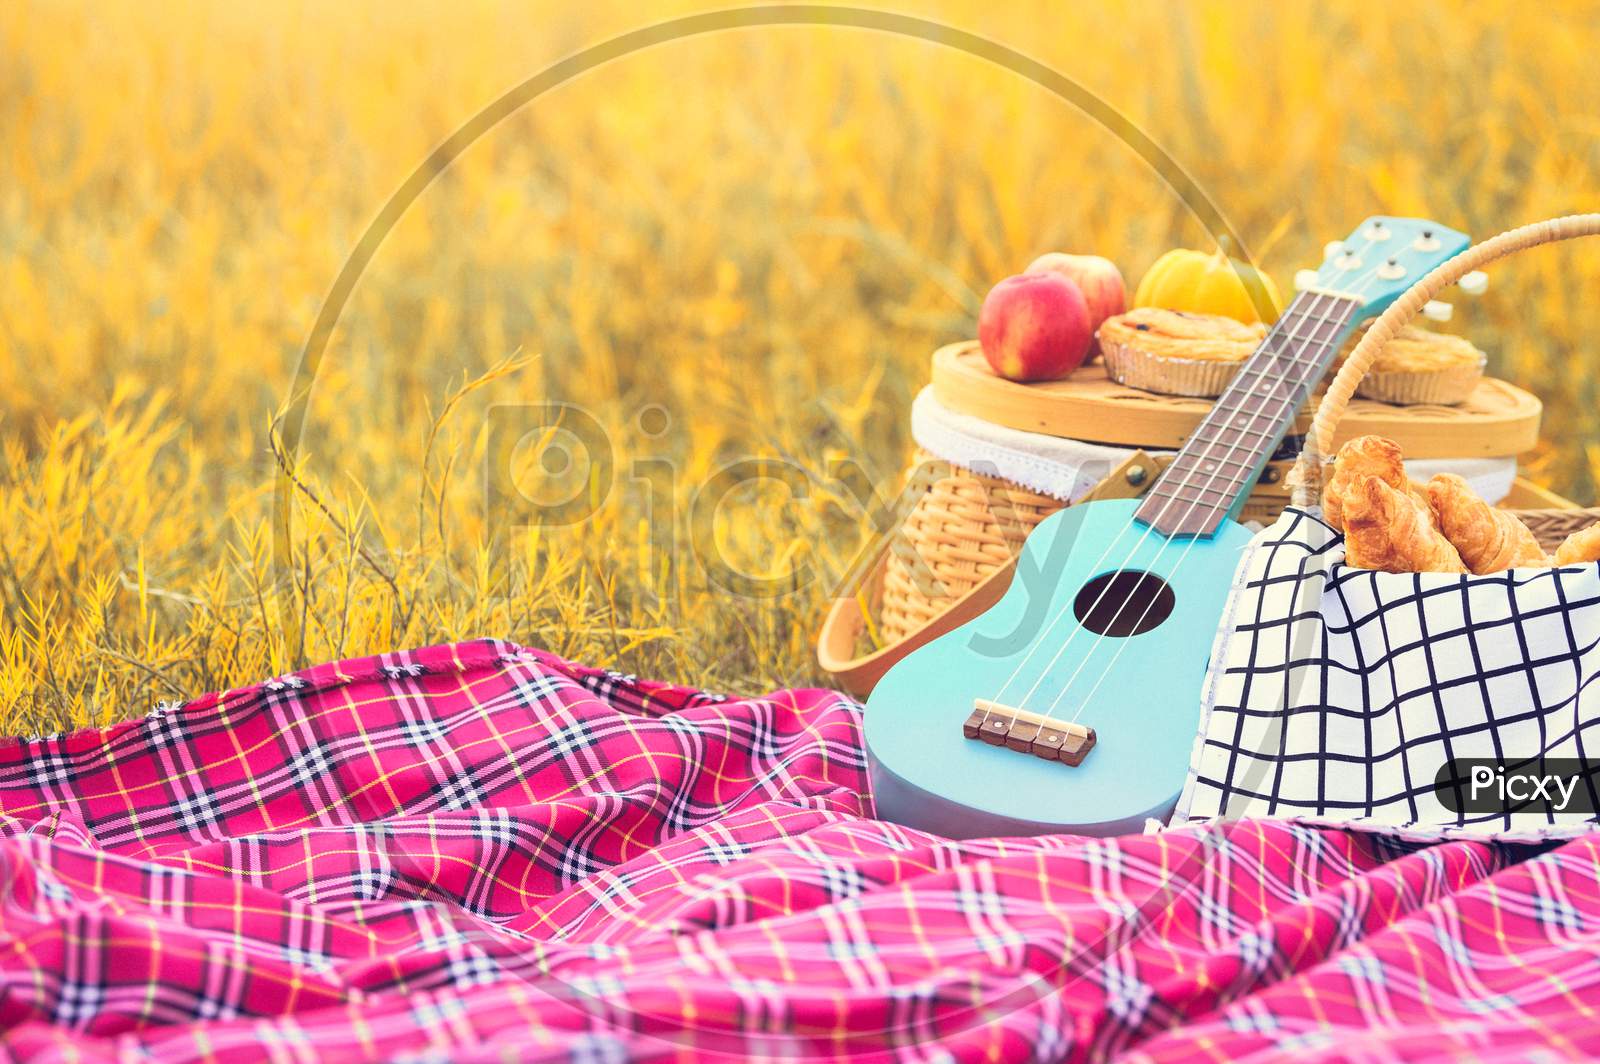 Picnic Props In The Autumn Meadow Field. Ukulele Guitar, Picnic Basket, Bread And Fruits On Picnic Mat On Grass. Object And Travel Relaxation Concept. Copy Space